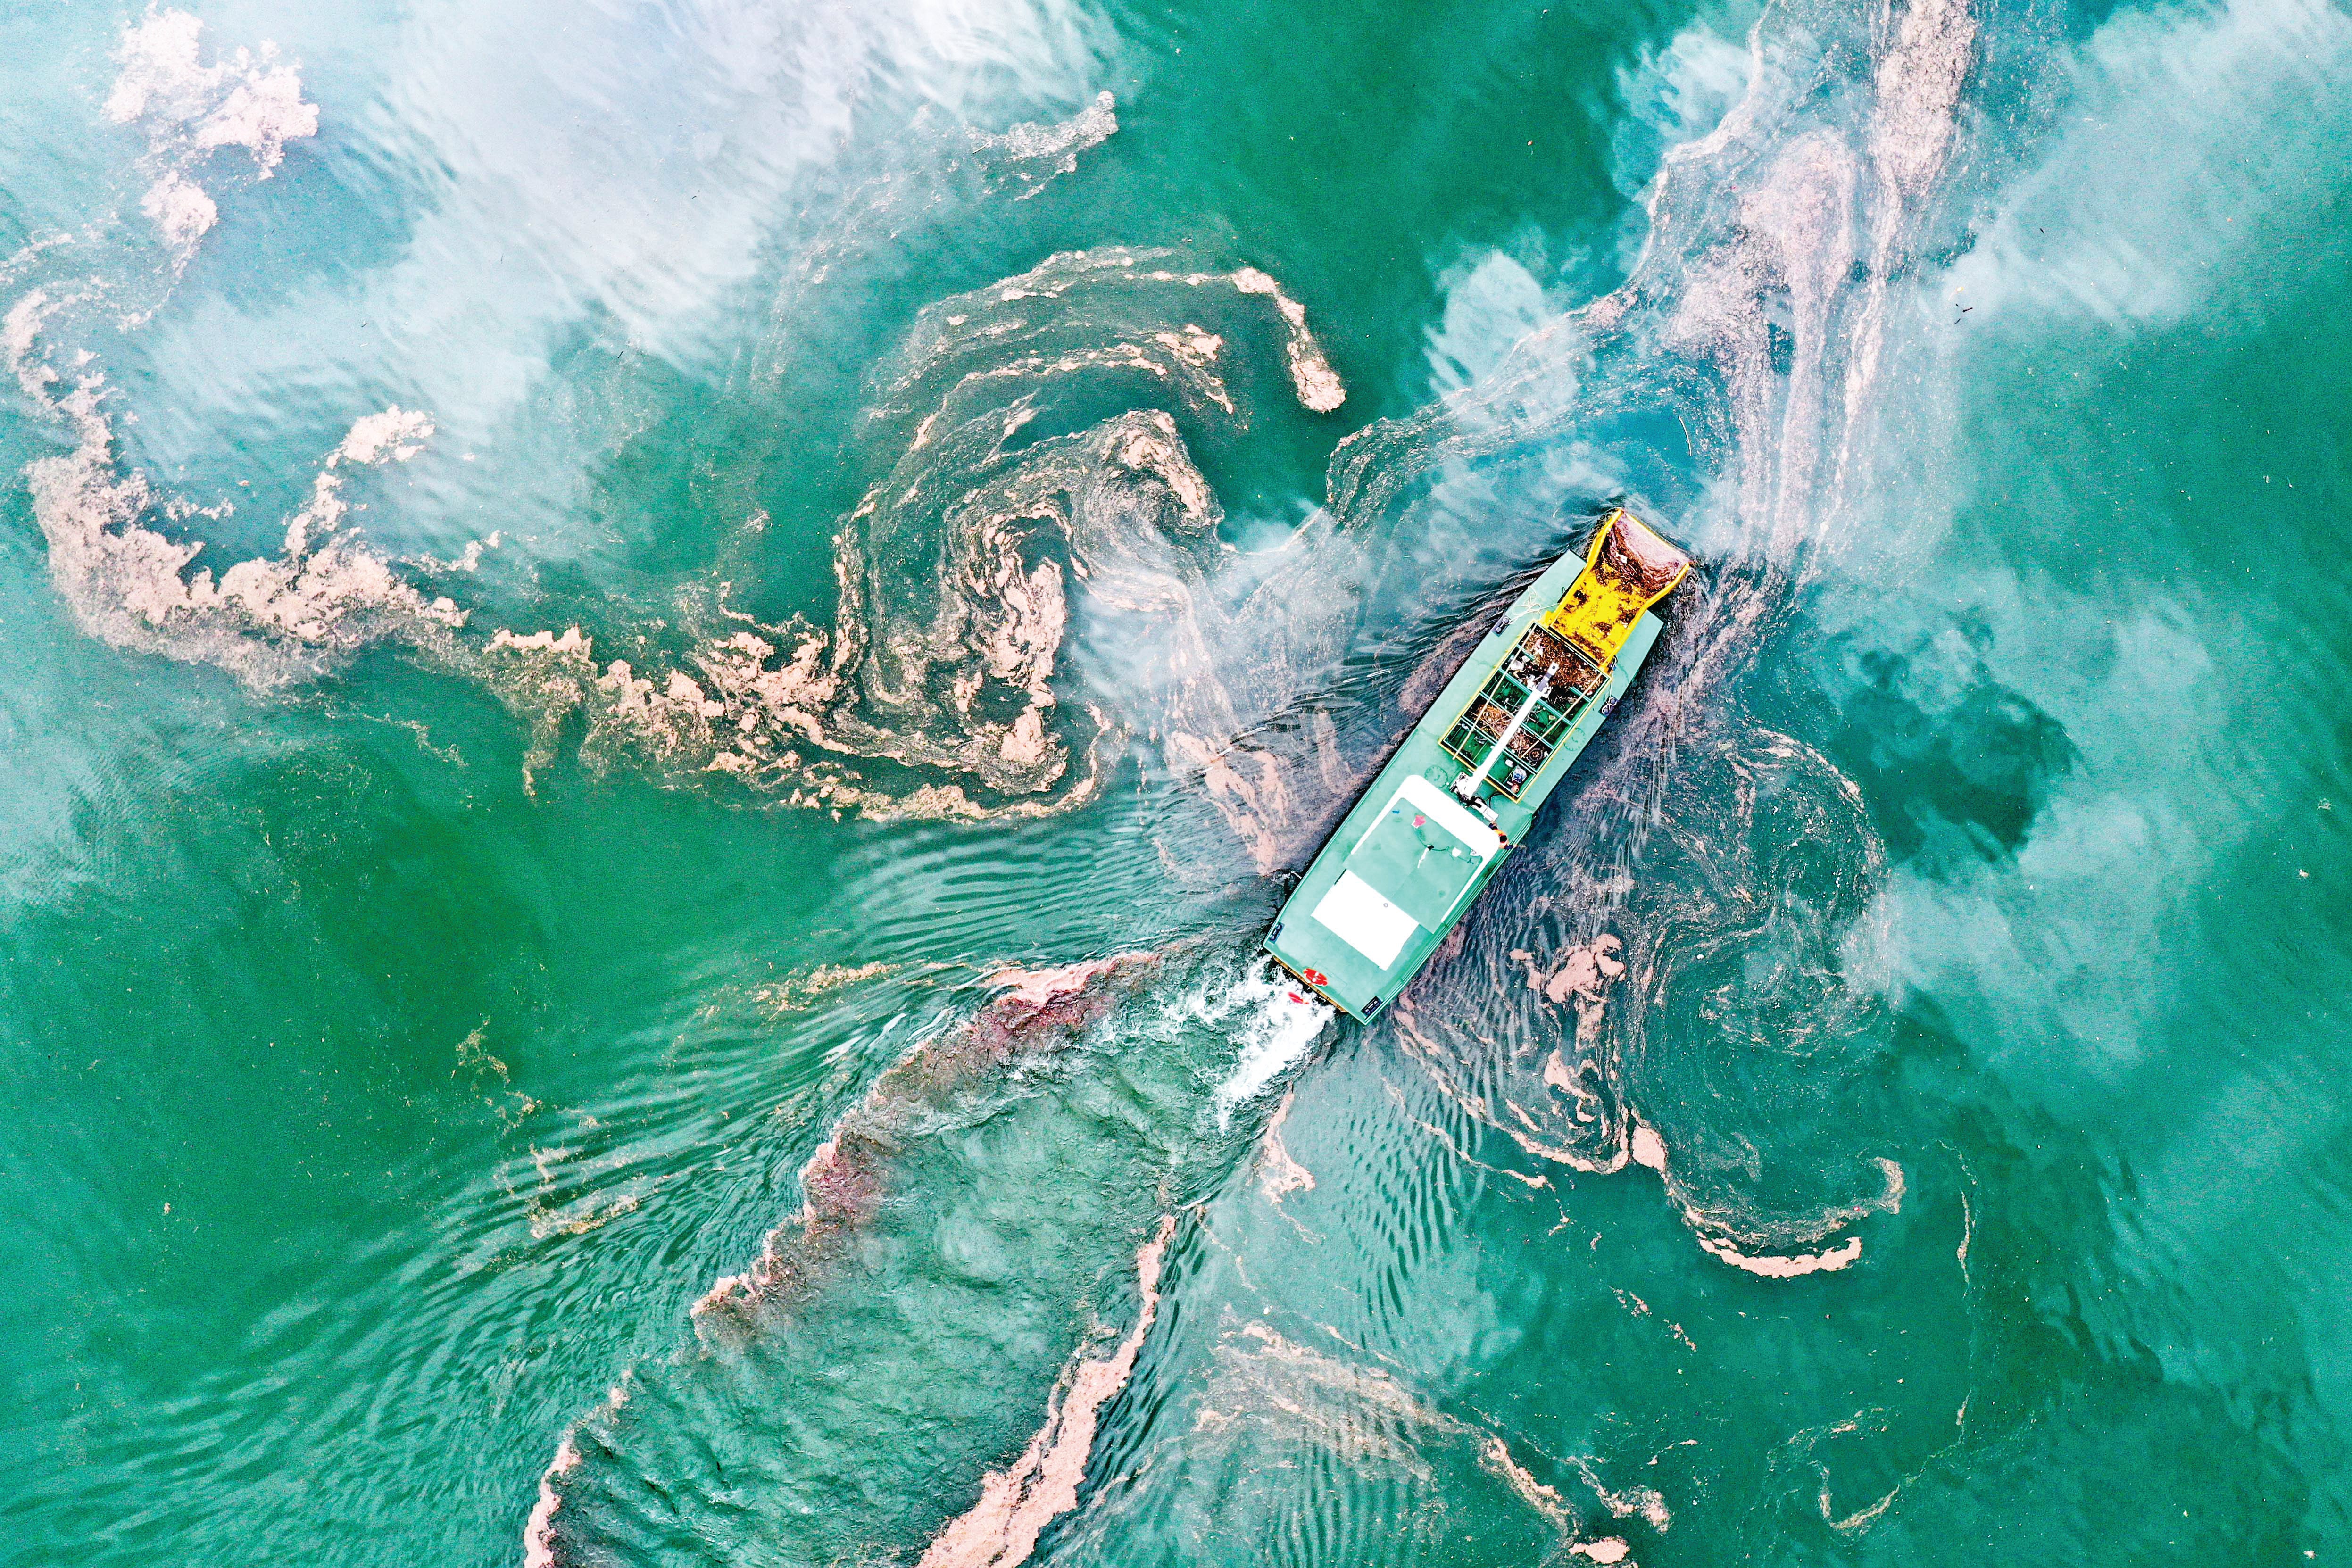 Garbage is cleared away with the help of a ship on the Wujiang River in Bijie